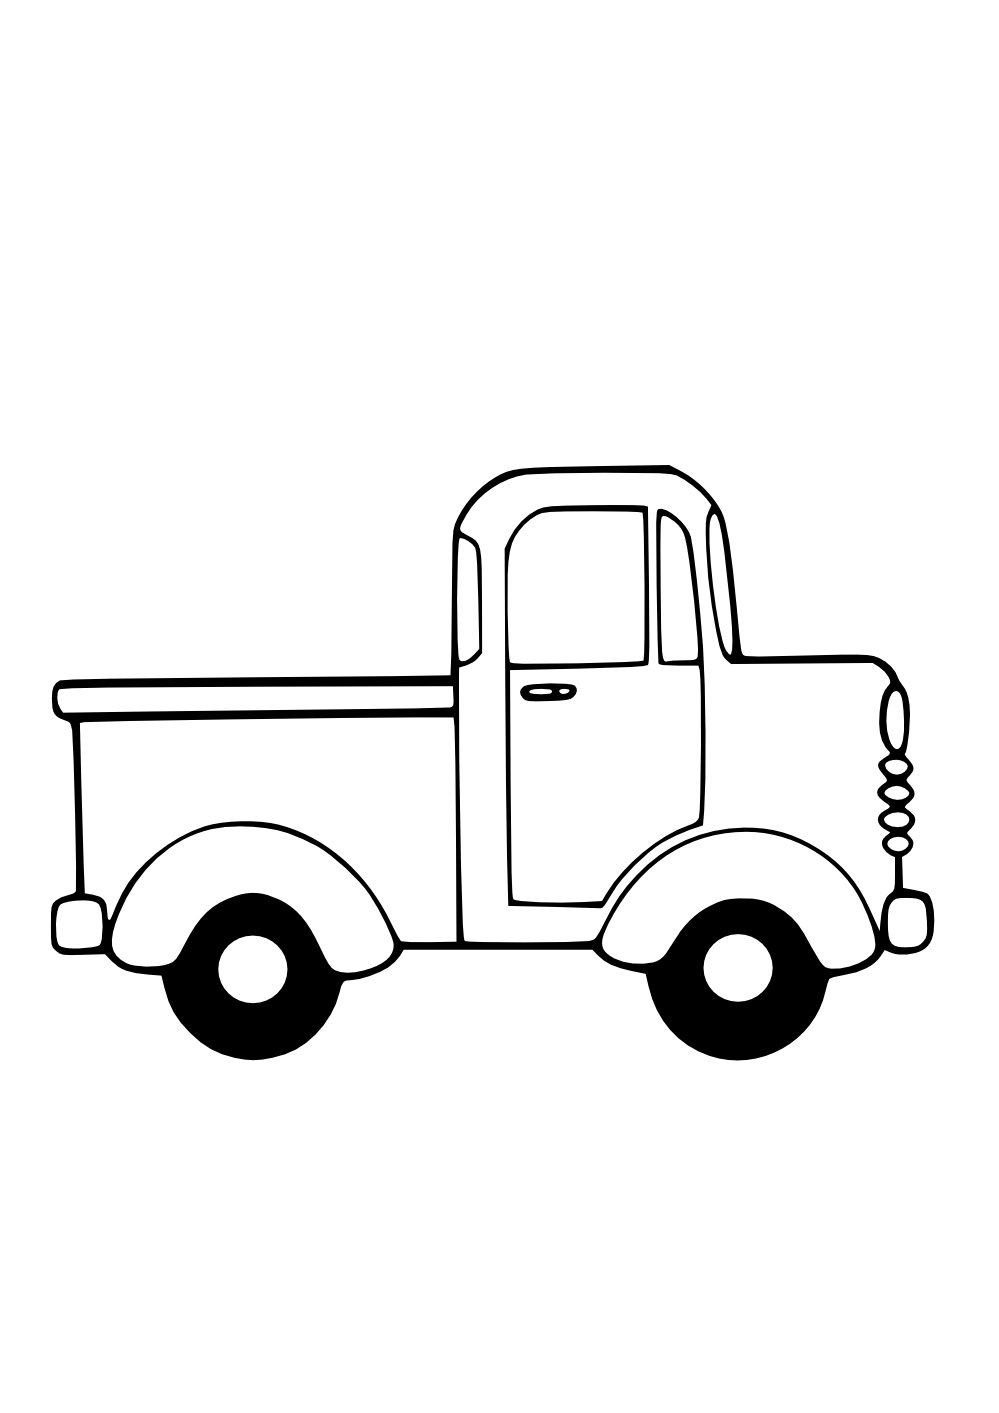 Truck panda free images. Clipart fire black and white